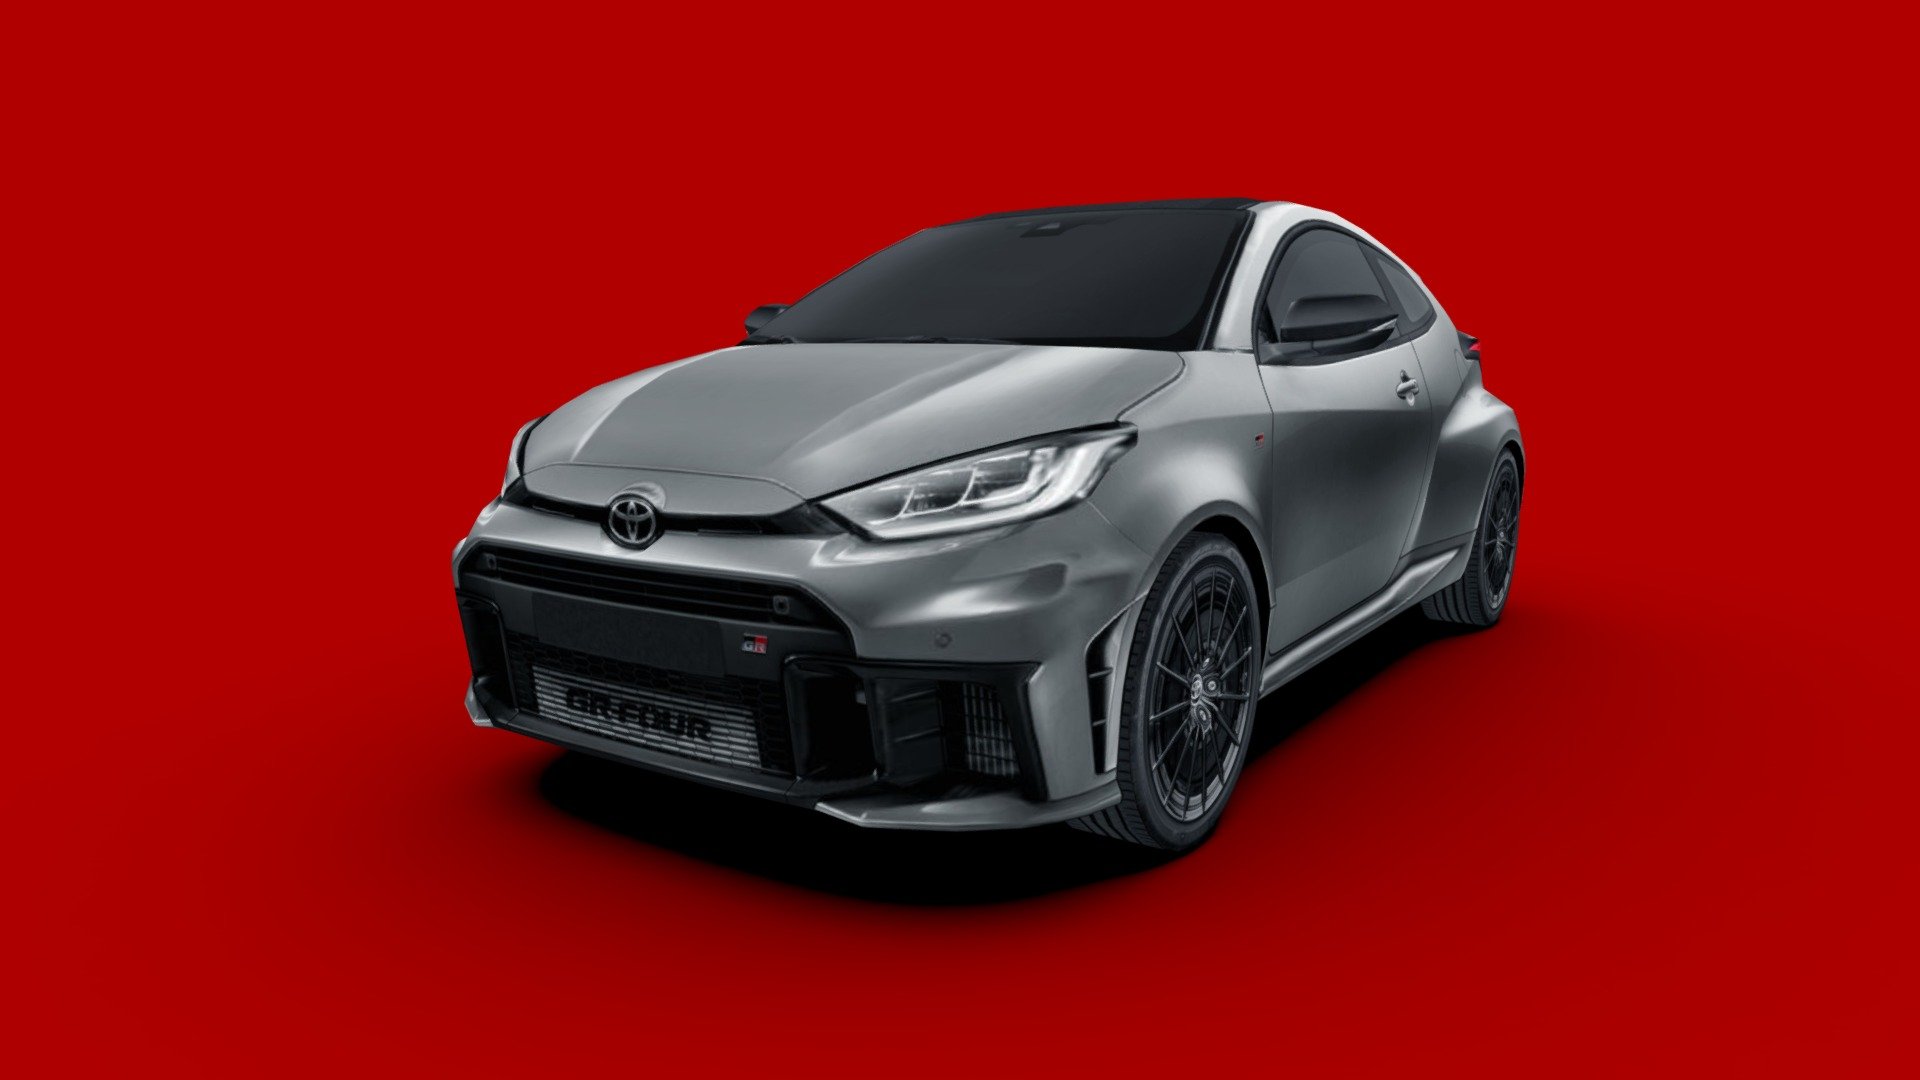 3d model of the 2024 Toyota GR Yaris, a supermini or subcompact sports car.

The model is very low-poly, full-scale, real photos texture (single 2048 x 2048 png).

Package includes 6 file formats and texture (3ds, fbx, dae, gltf, obj and skp)

Hope you enjoy it.

José Bronze - Toyota GR Yaris 2024 - Buy Royalty Free 3D model by Jose Bronze (@pinceladas3d) 3d model